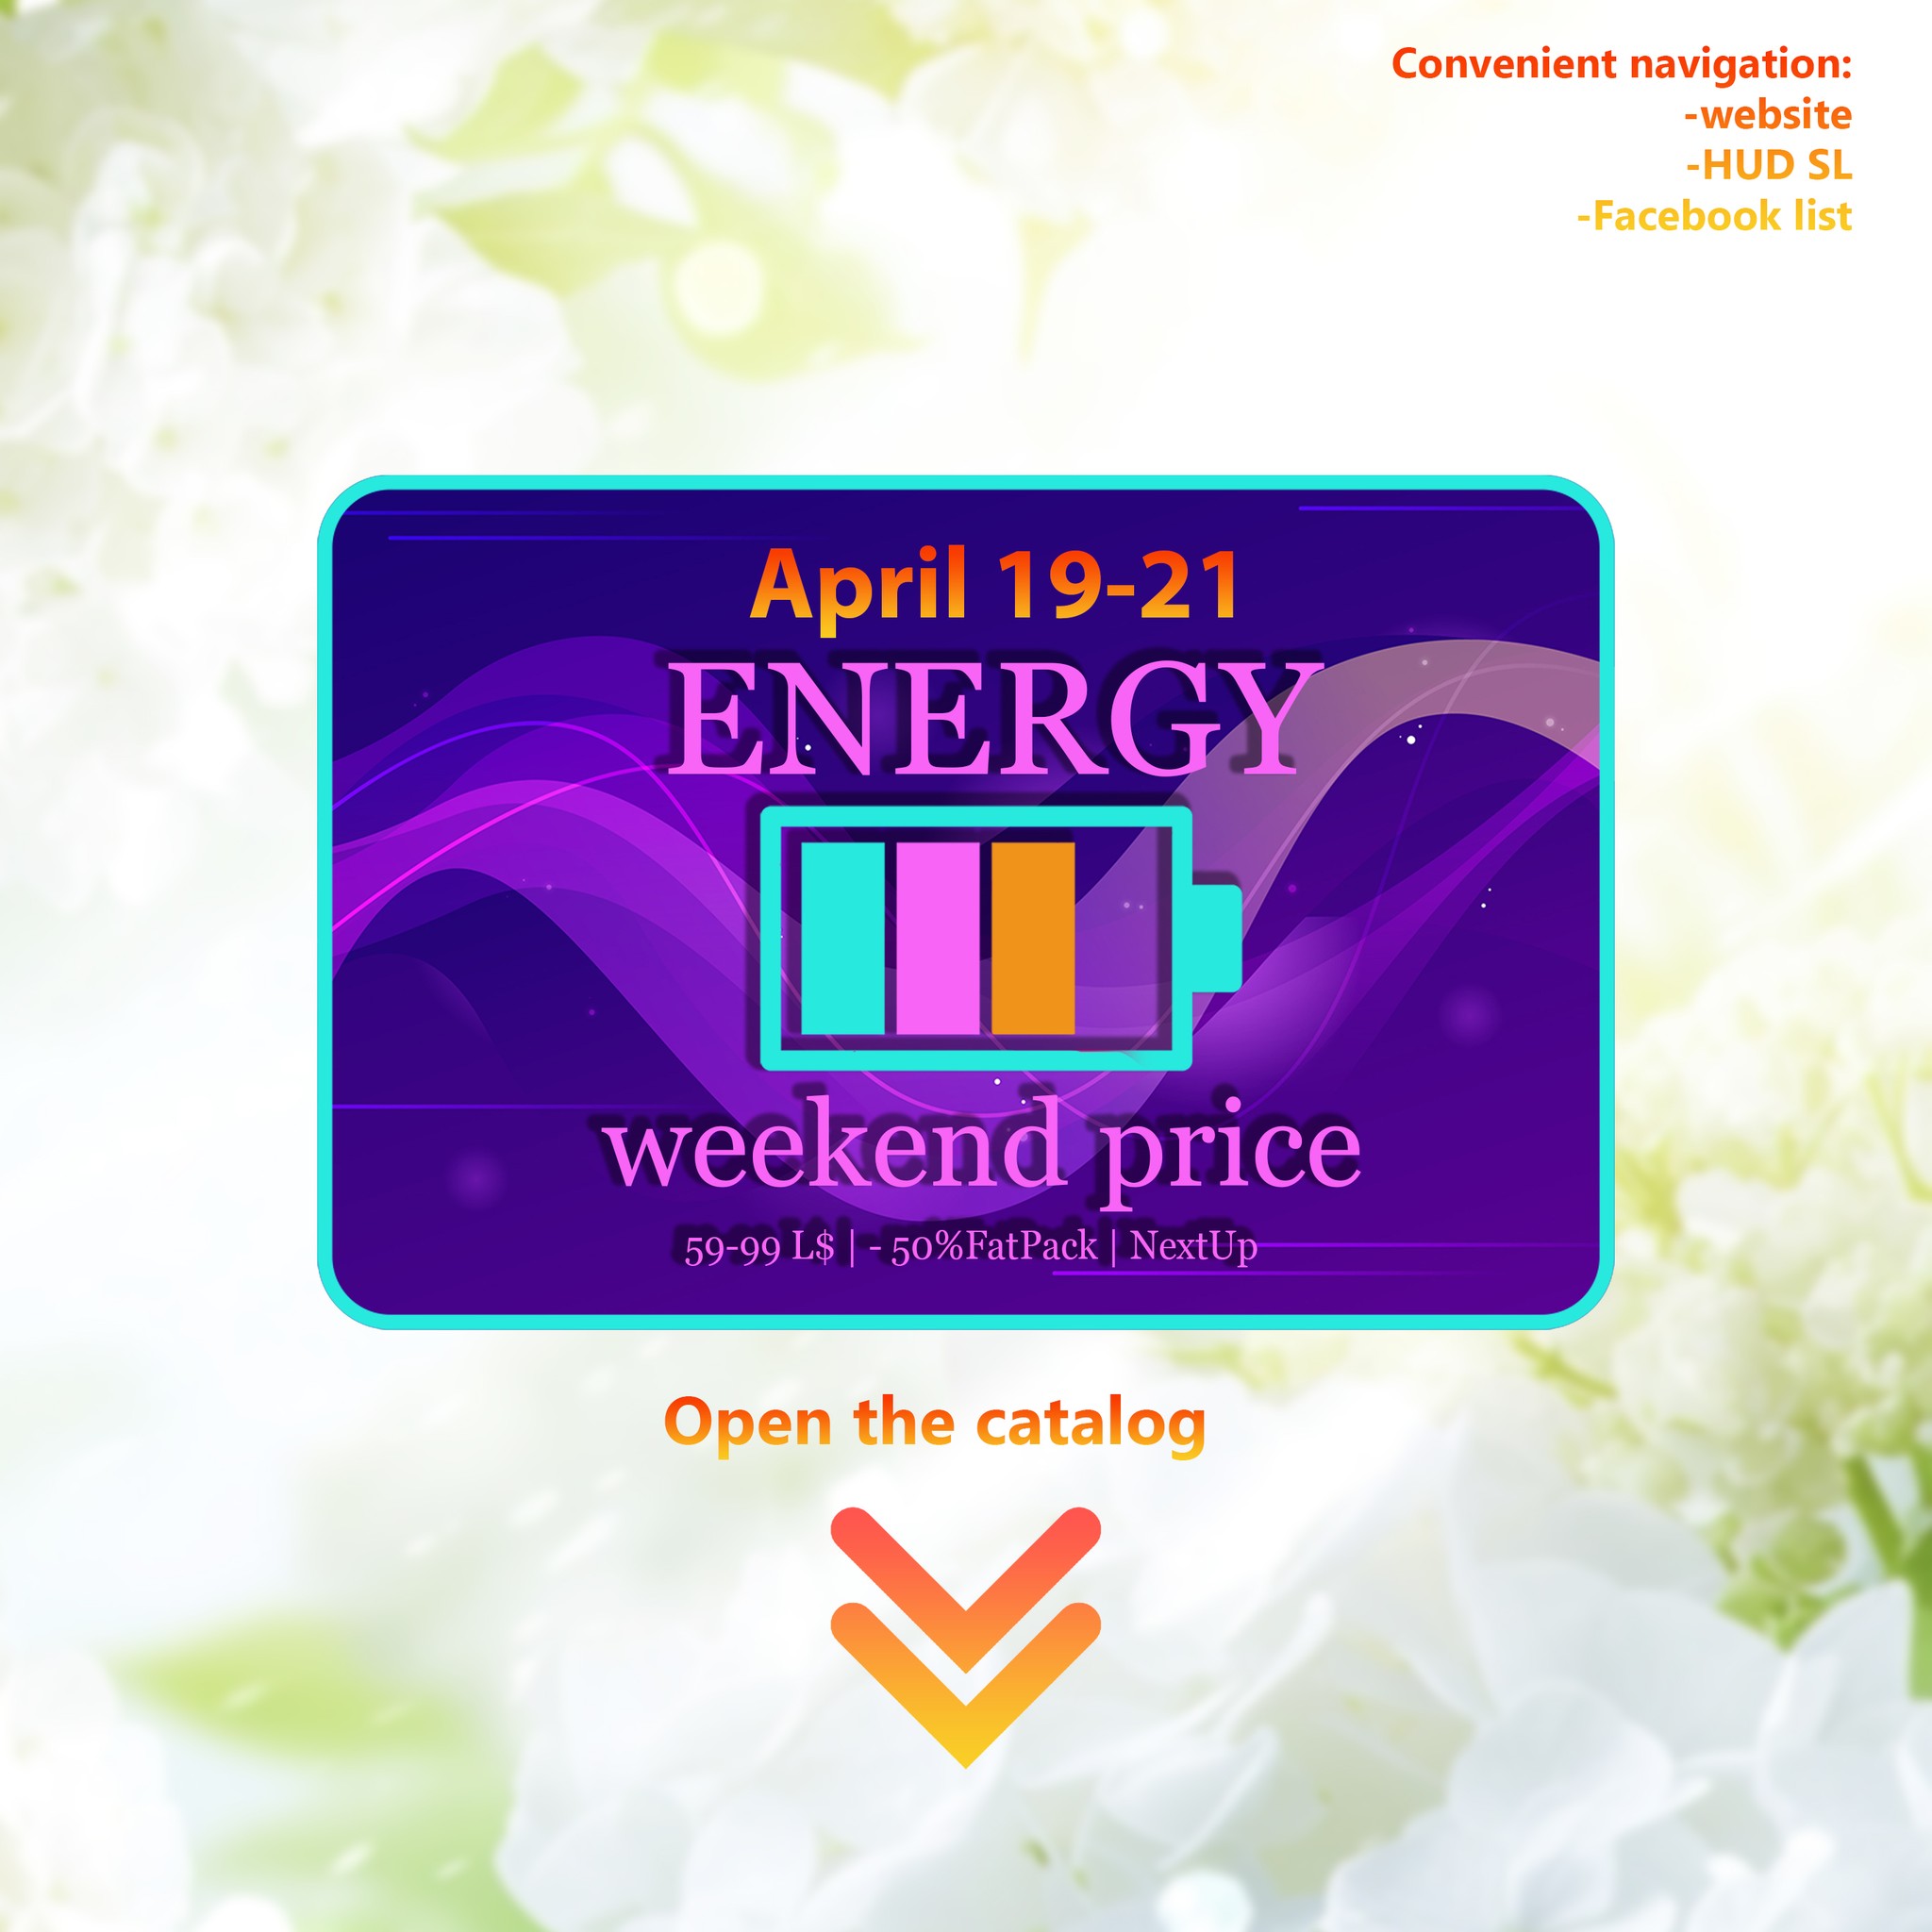 ENJOY DISCOUNT DELIGHTS AT THE ENERGY WEEKEND PRICE